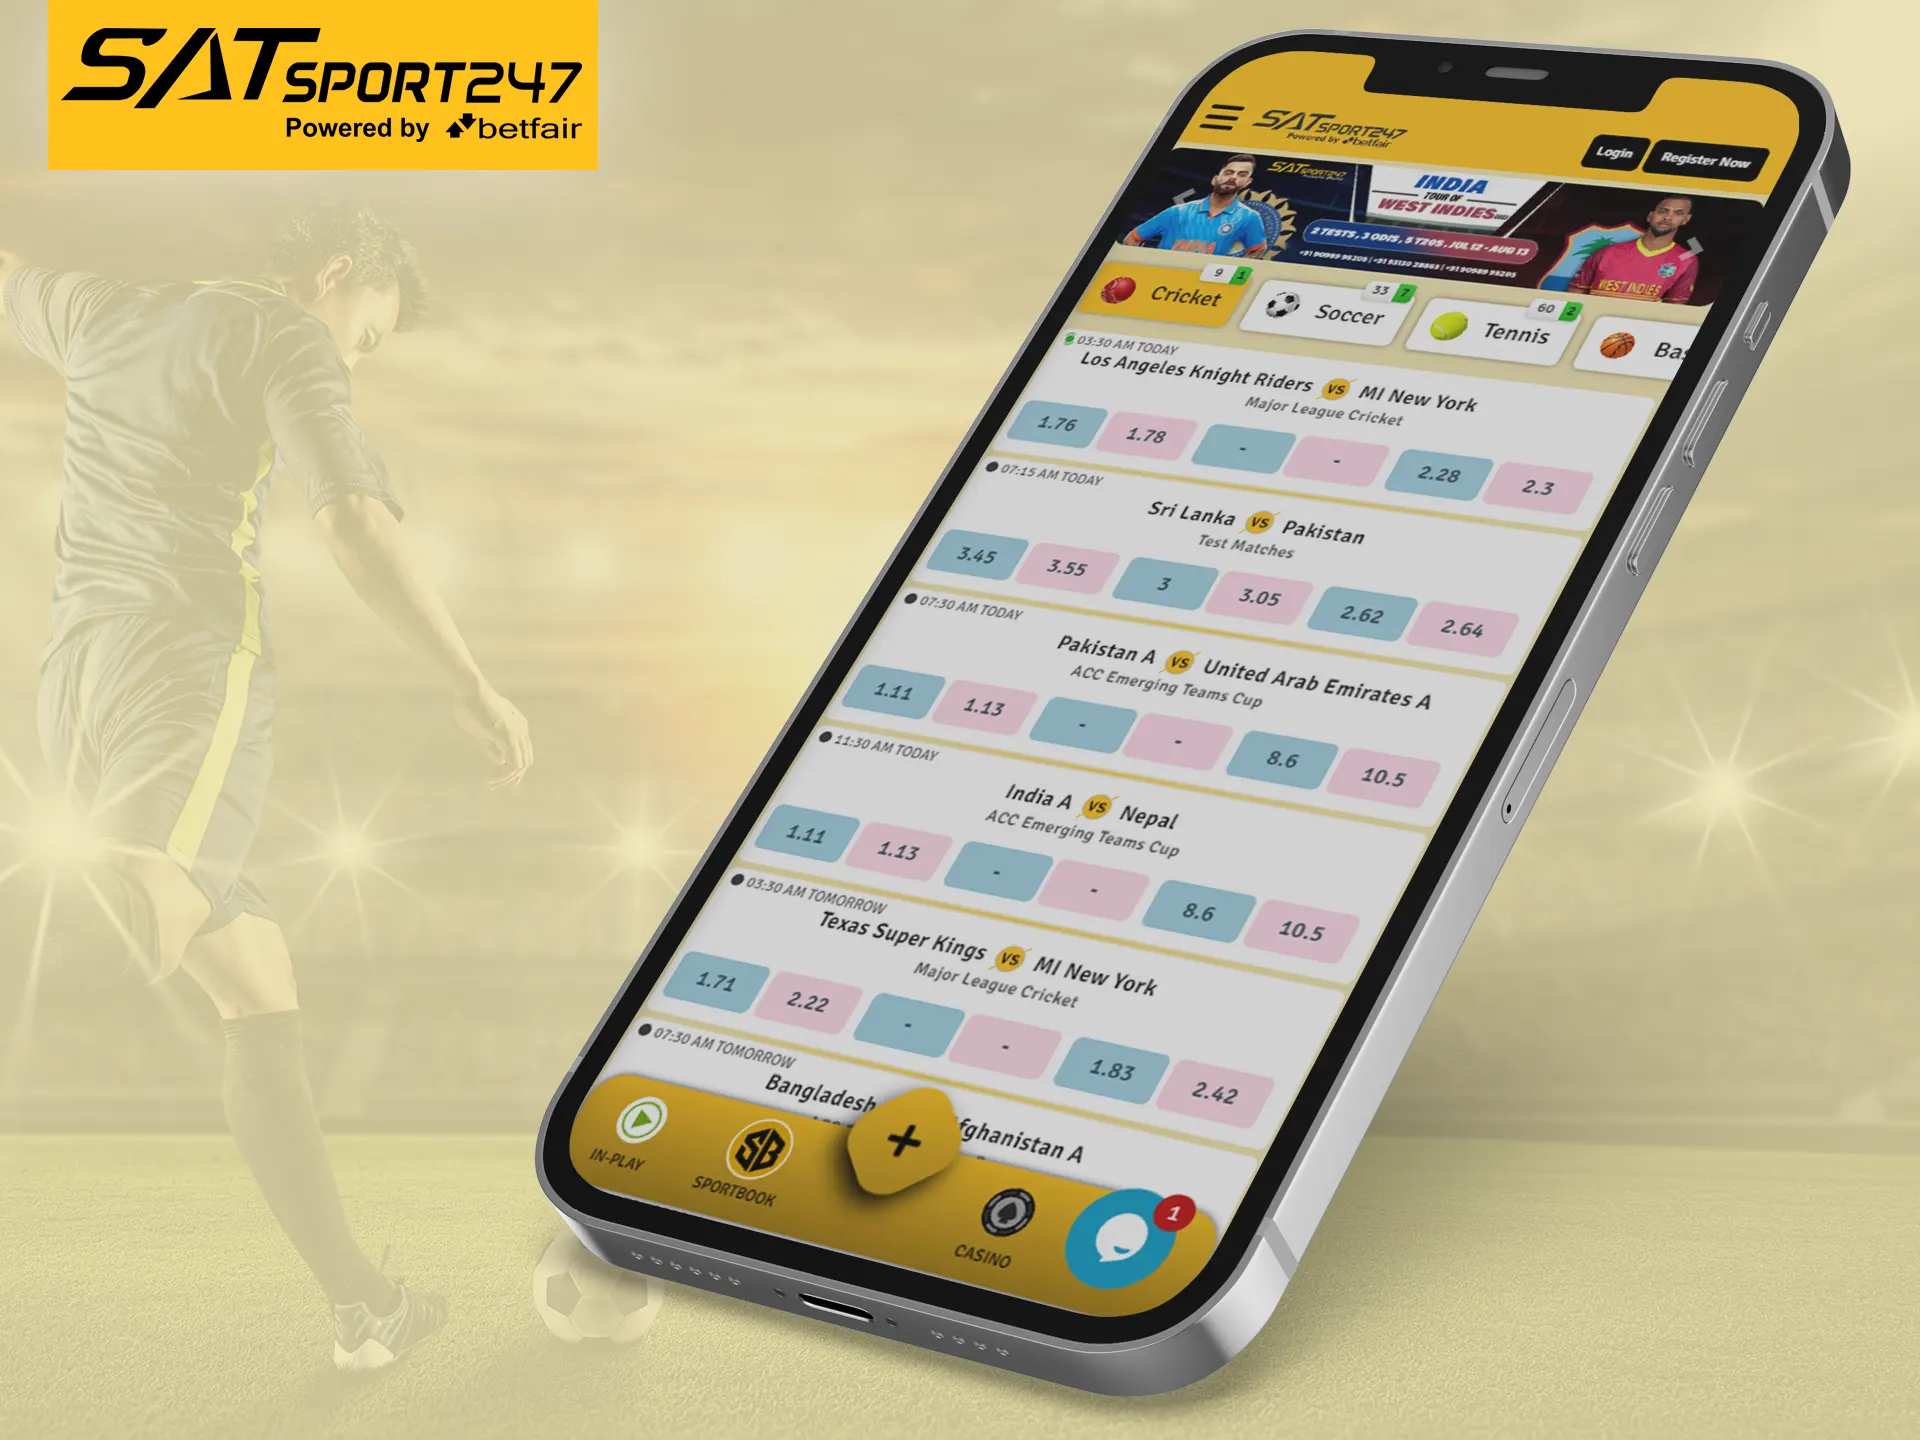 You can open a web version of Satsport247 on your mobile phone and bet via it.